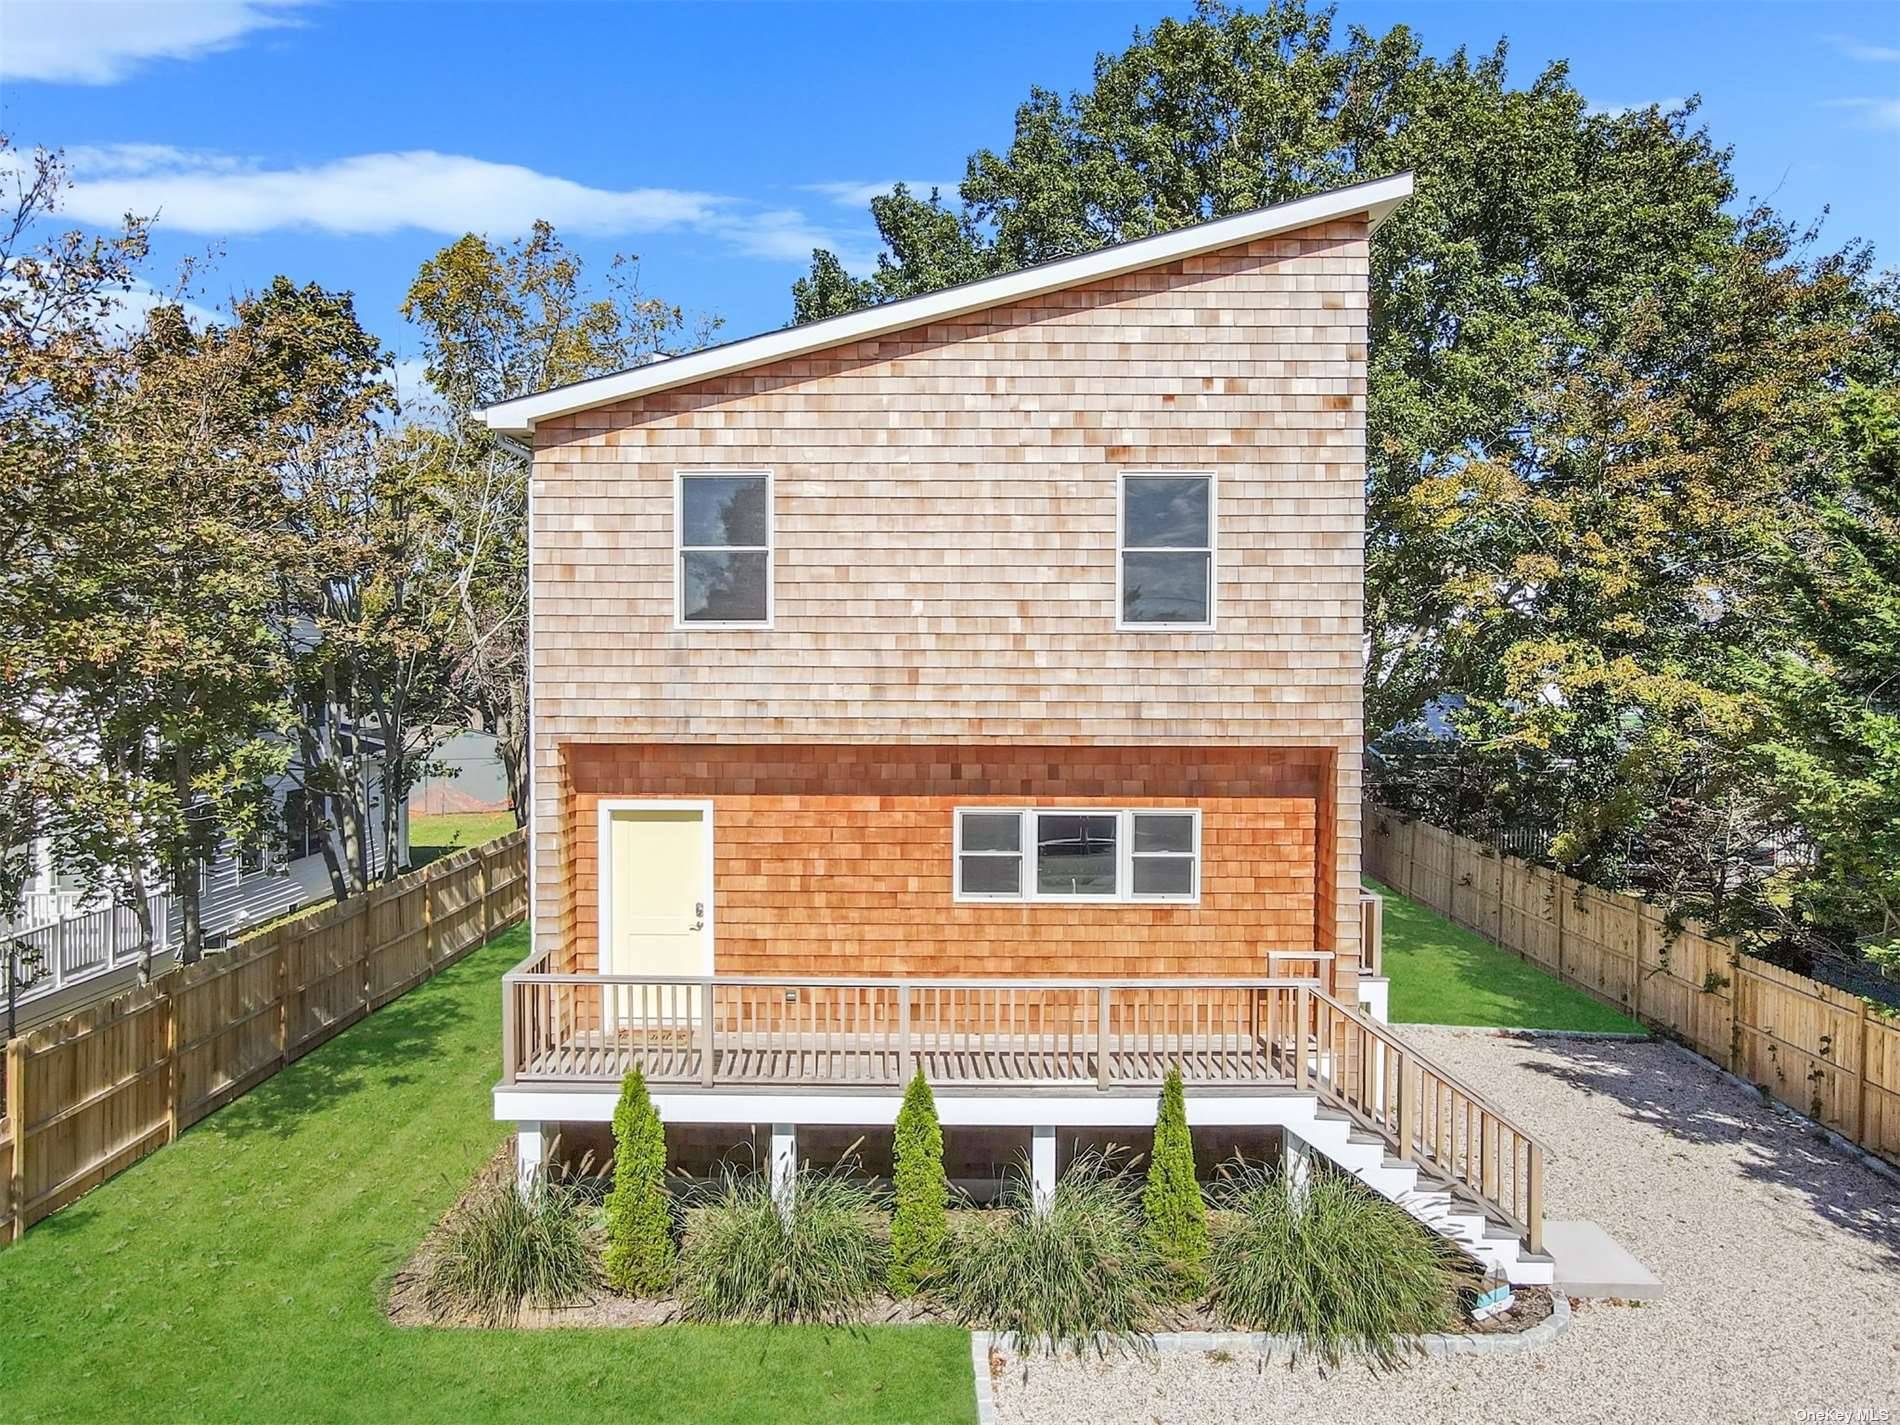 Introducing a modern 2 story residence nestled in the charming village of Greenport.